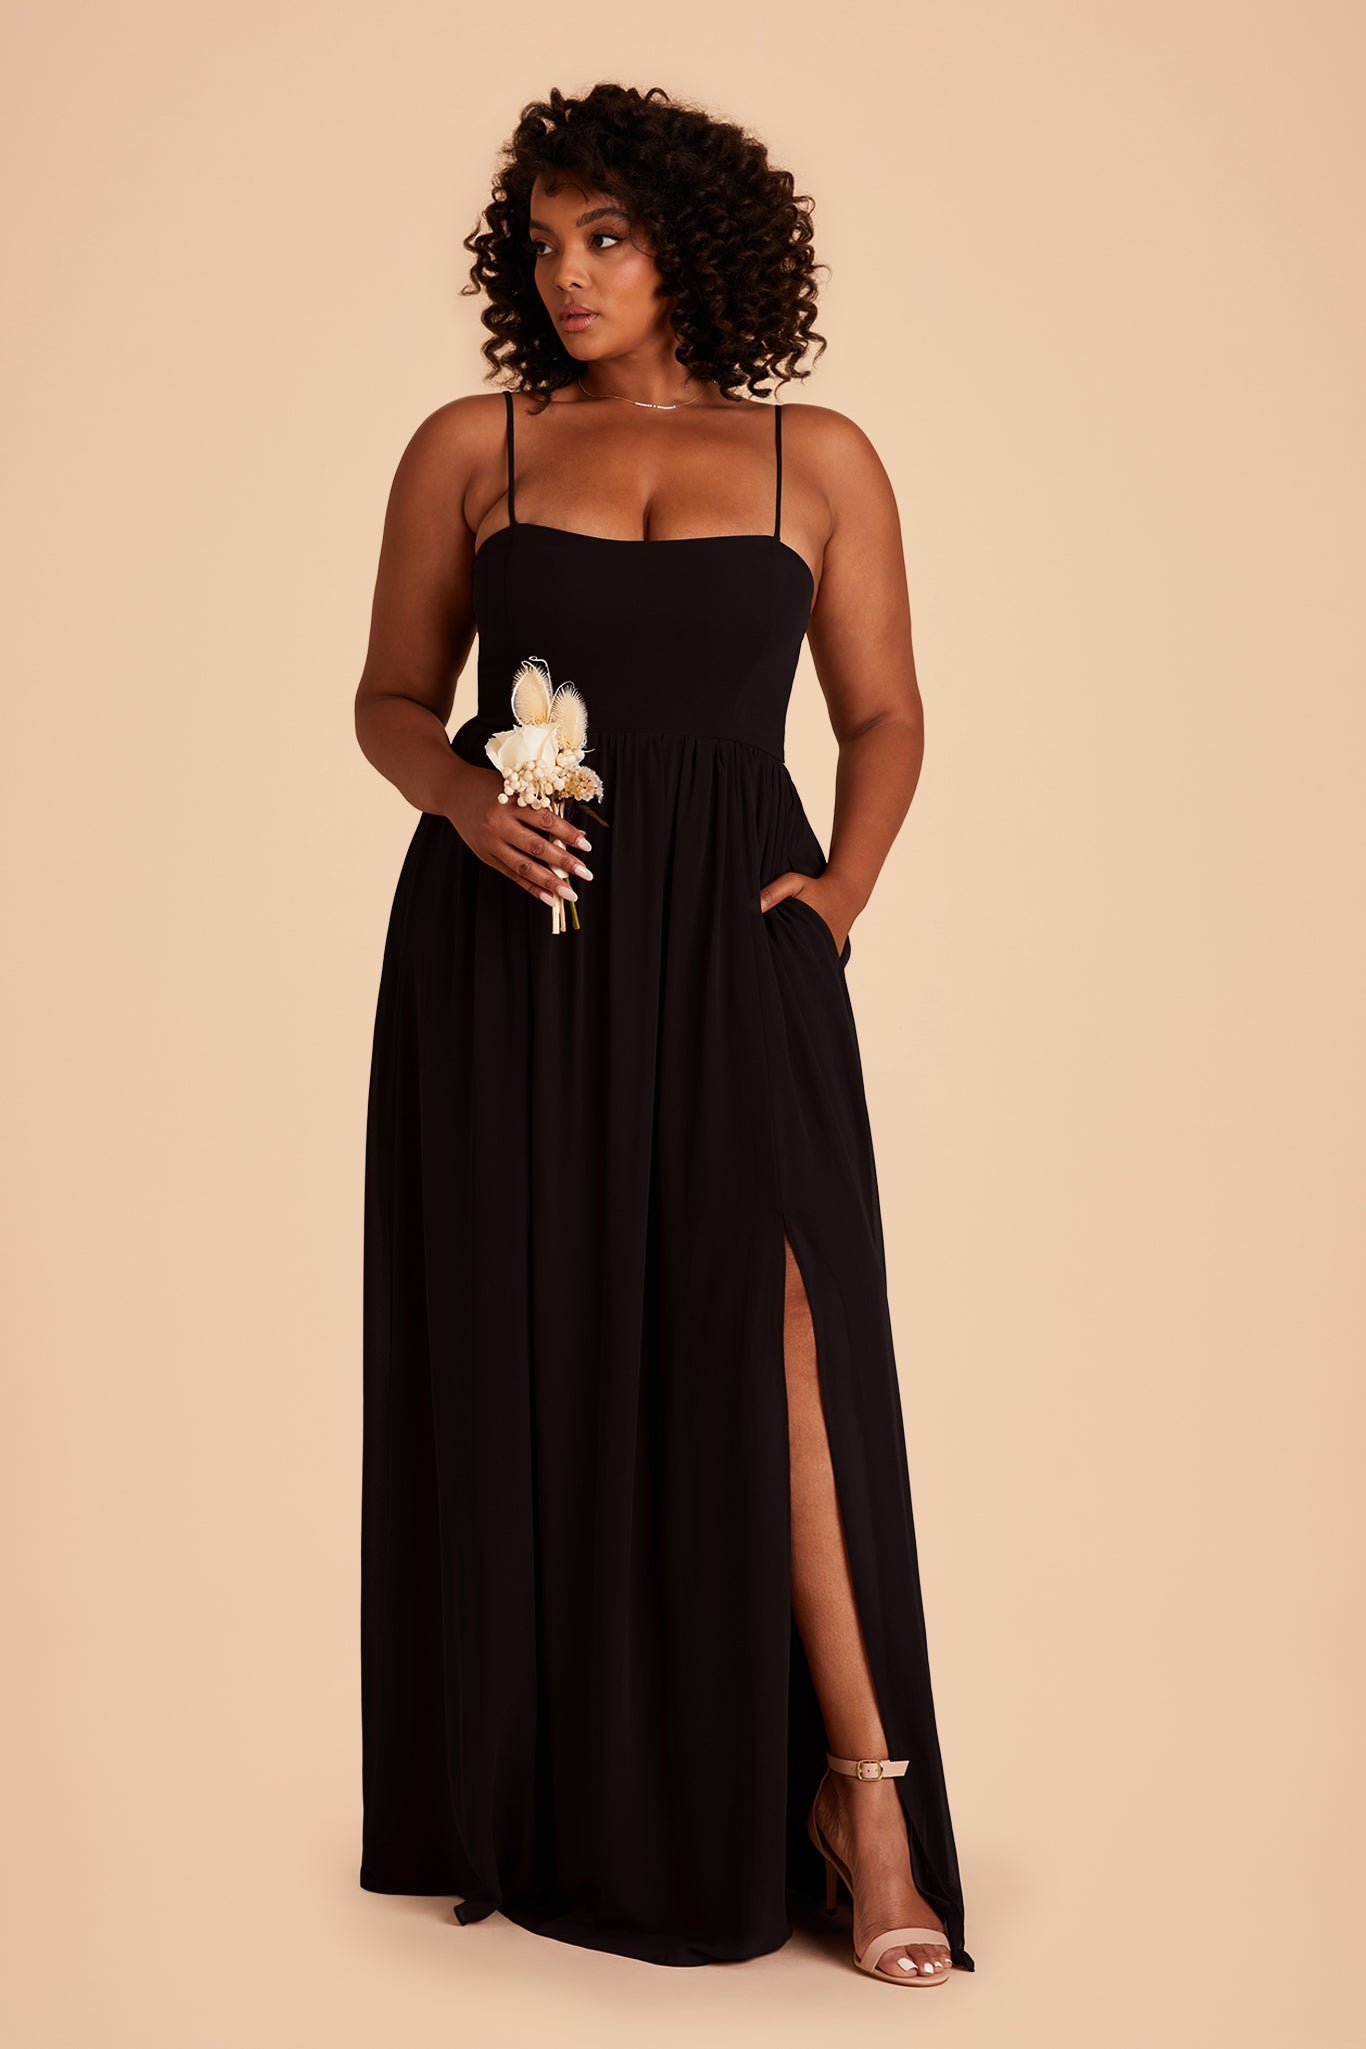 August plus size bridesmaid dress with slit in black chiffon by Birdy Grey, front view